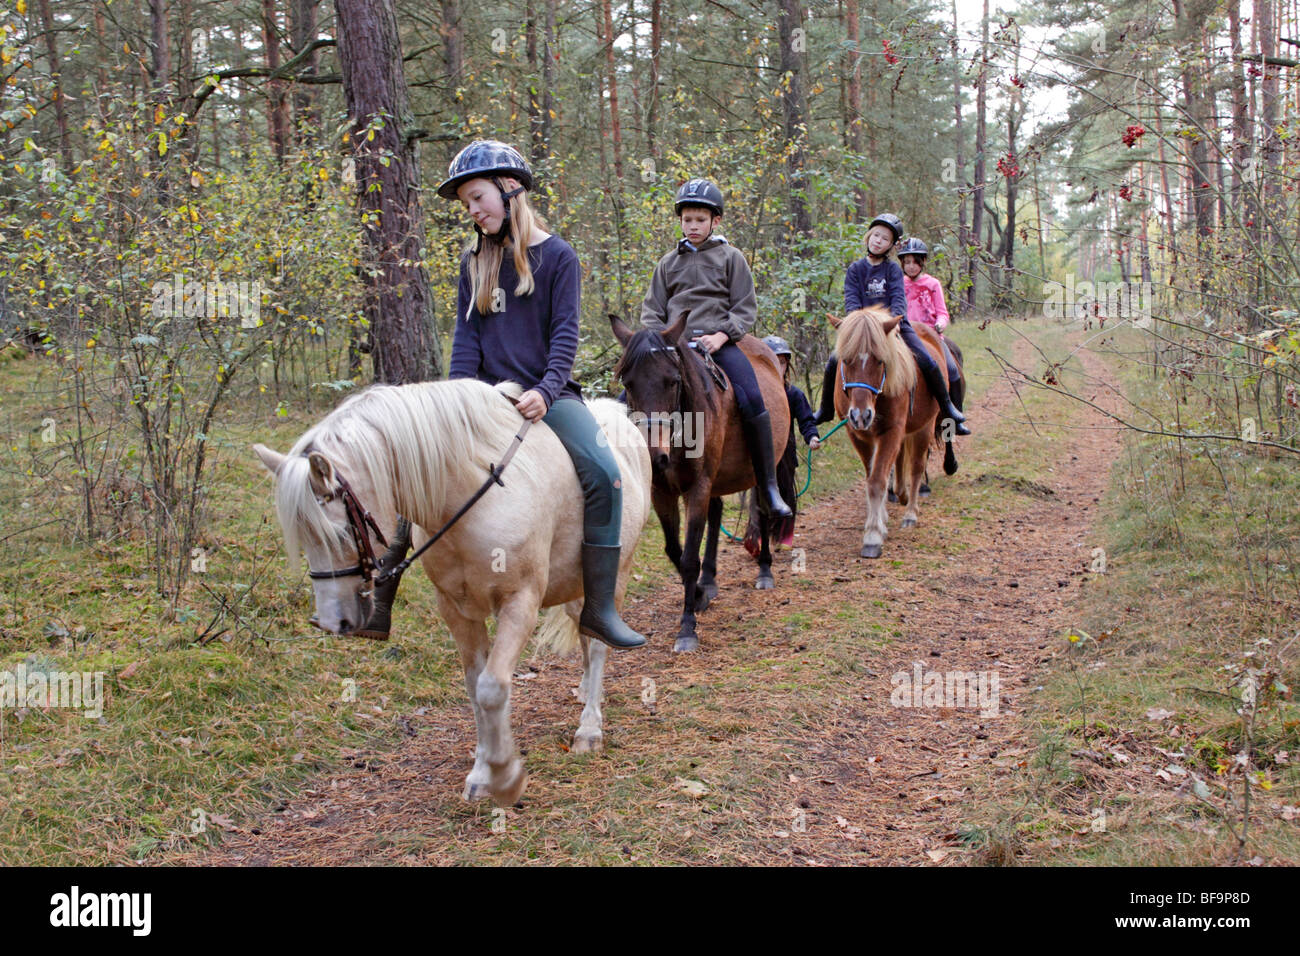 children horseback riding in a forest Stock Photo